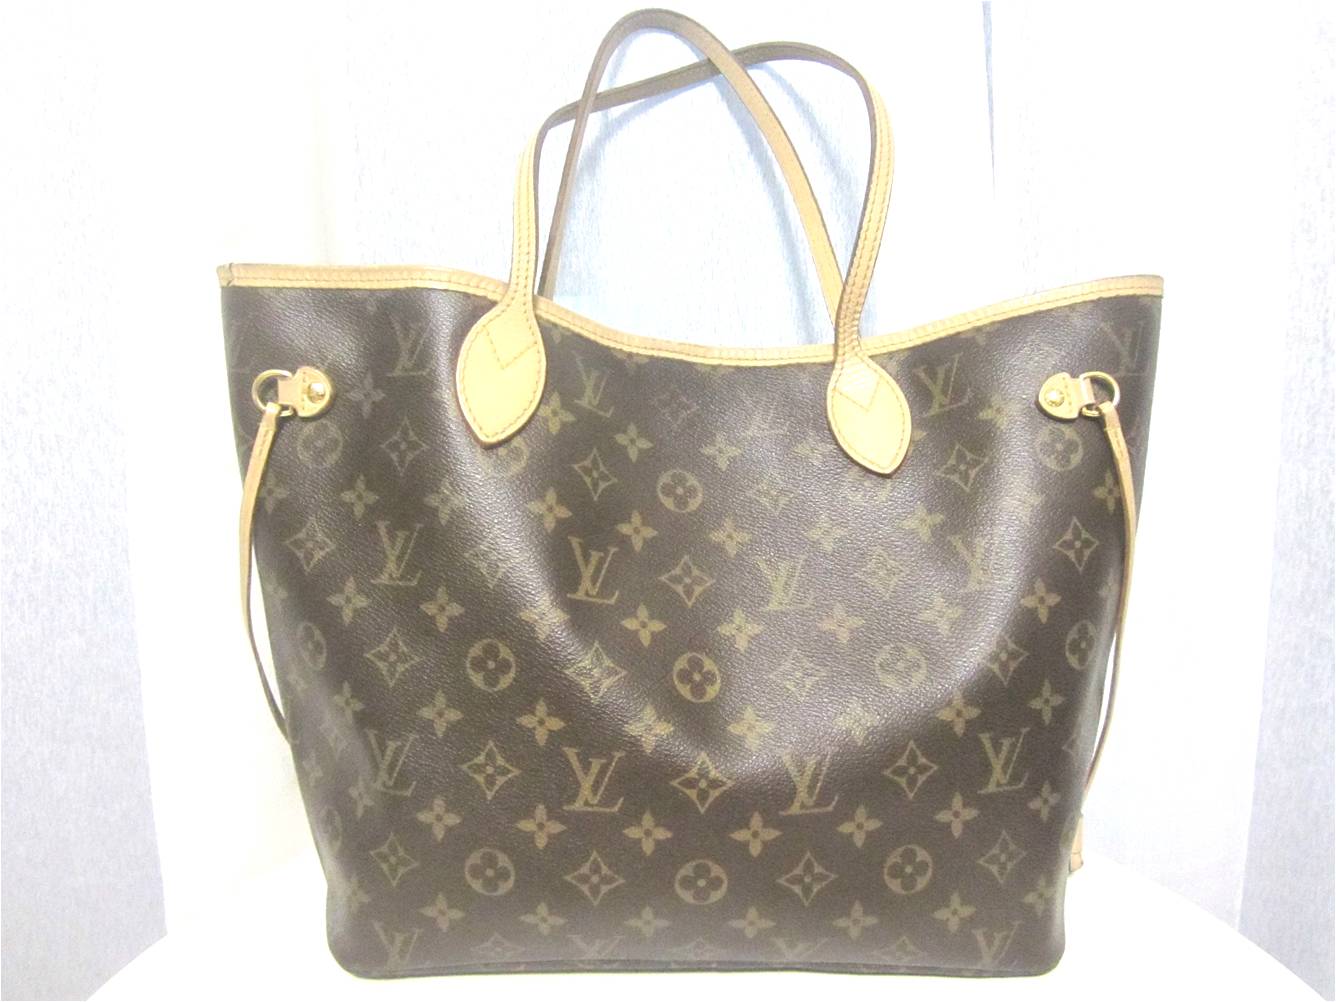 The Bags Affairs ~ Satisfy your lust for designer bags: LOUIS VUITTON MONOGRAM CANVAS NEVERFULL ...